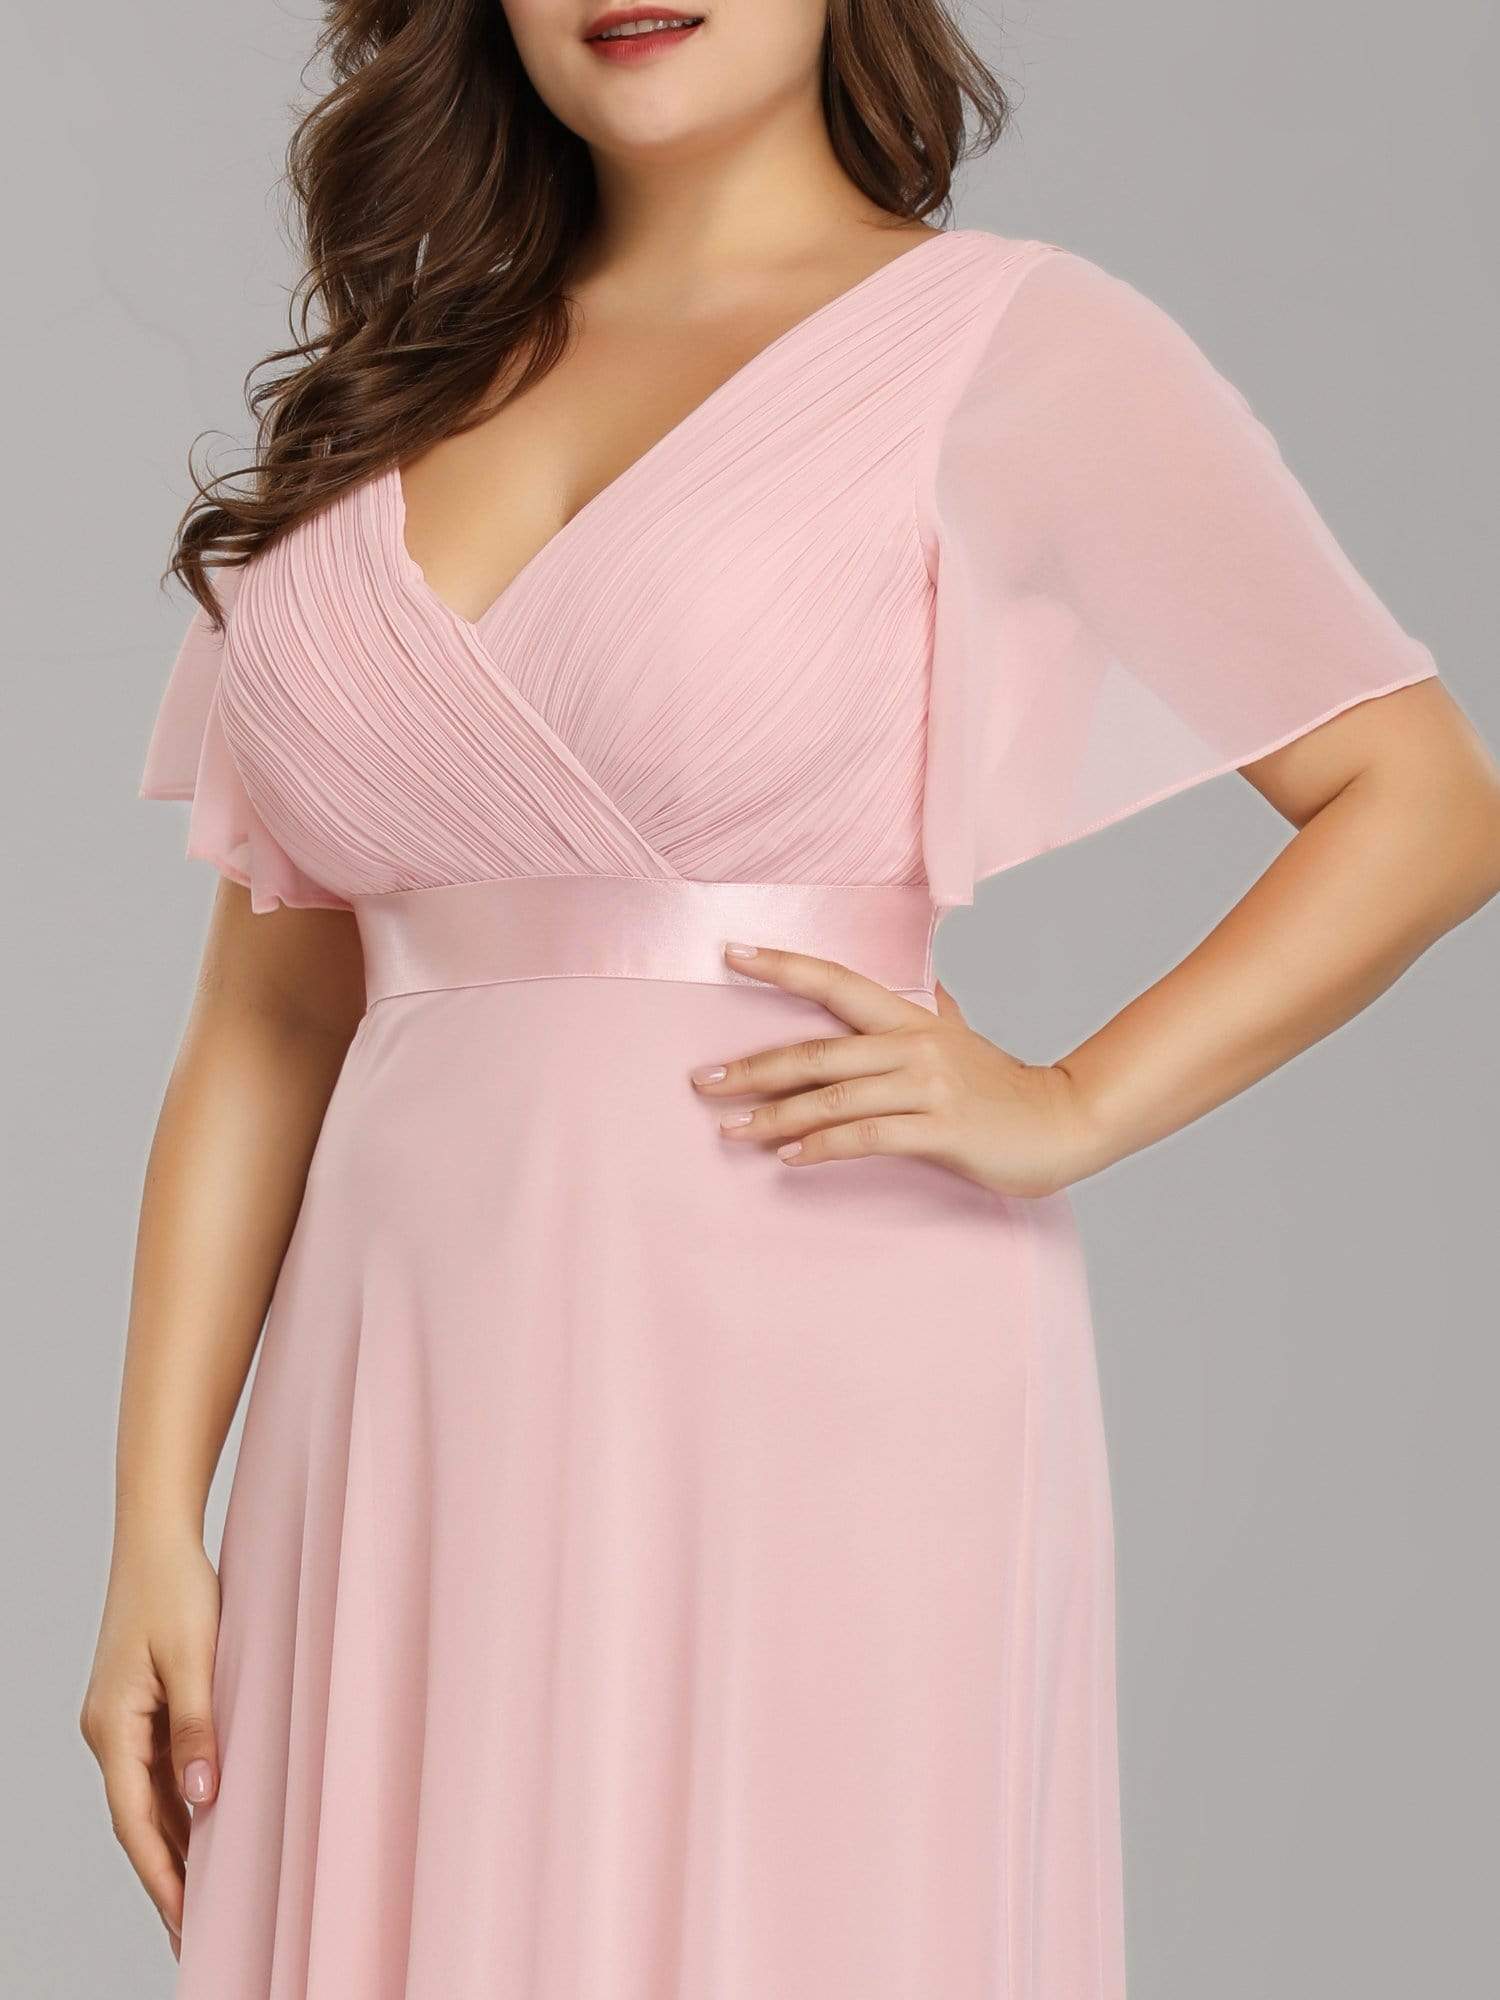 COLOR=Pink | Plus Size Long Empire Waist Evening Dress With Short Flutter Sleeves-Pink 5